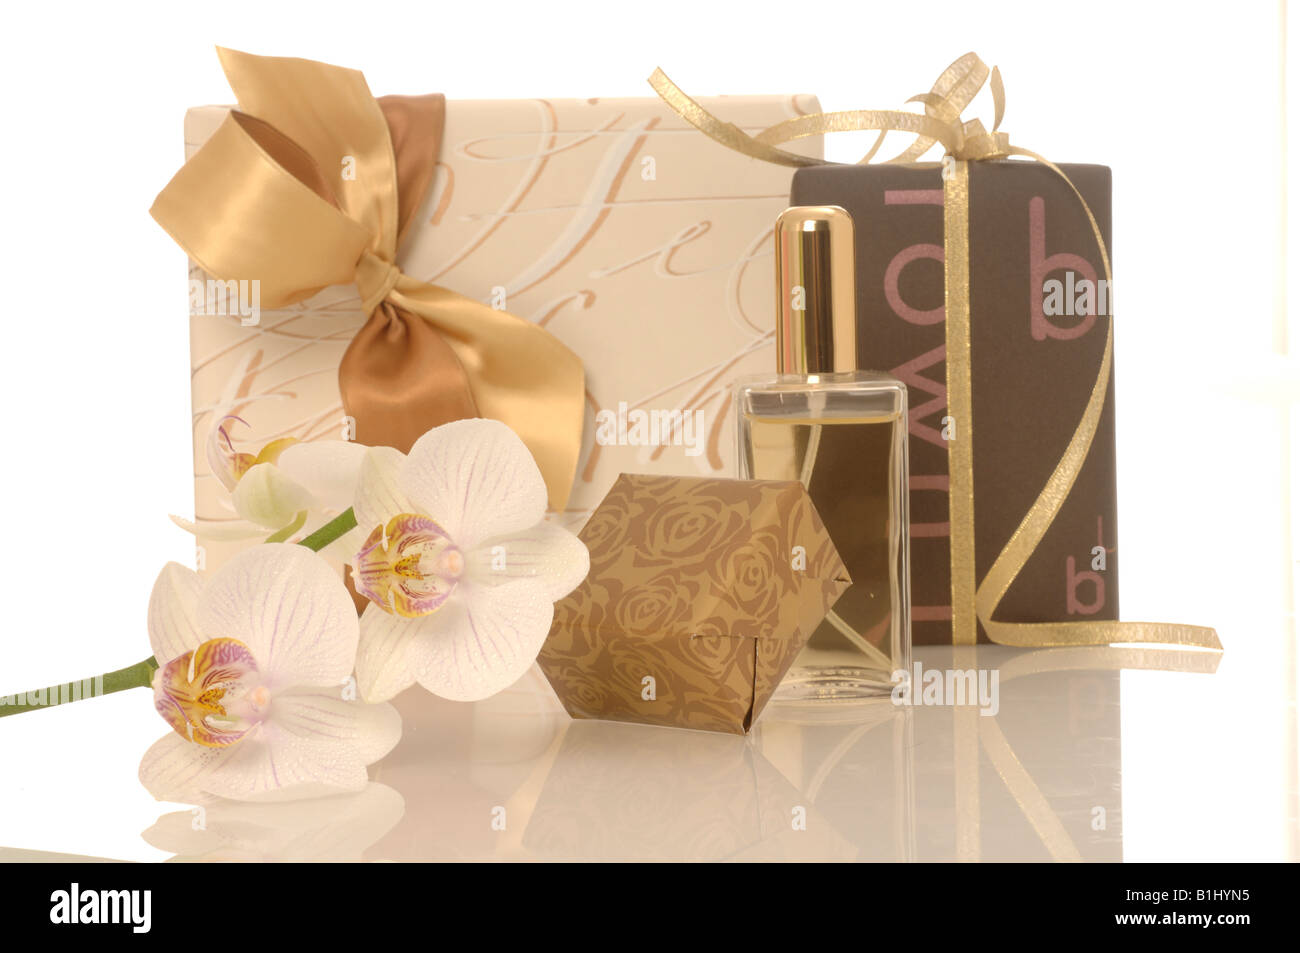 Gifts and small perfume bottle Stock Photo